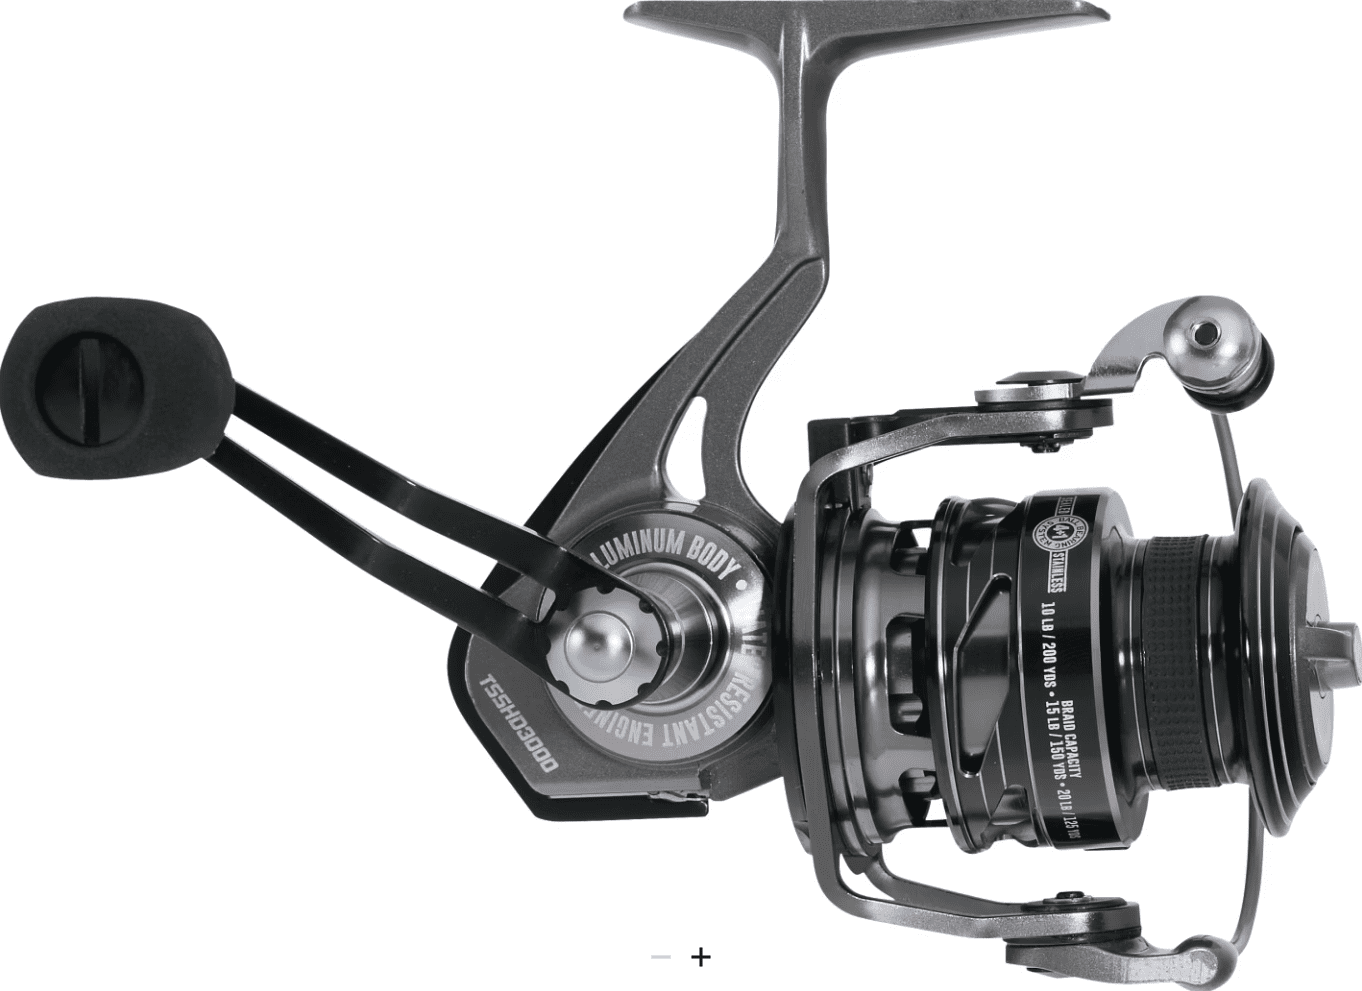 Saltwater Fishing Spinning Reels 3000-11000 High Speed Ultra Smooth Powerful